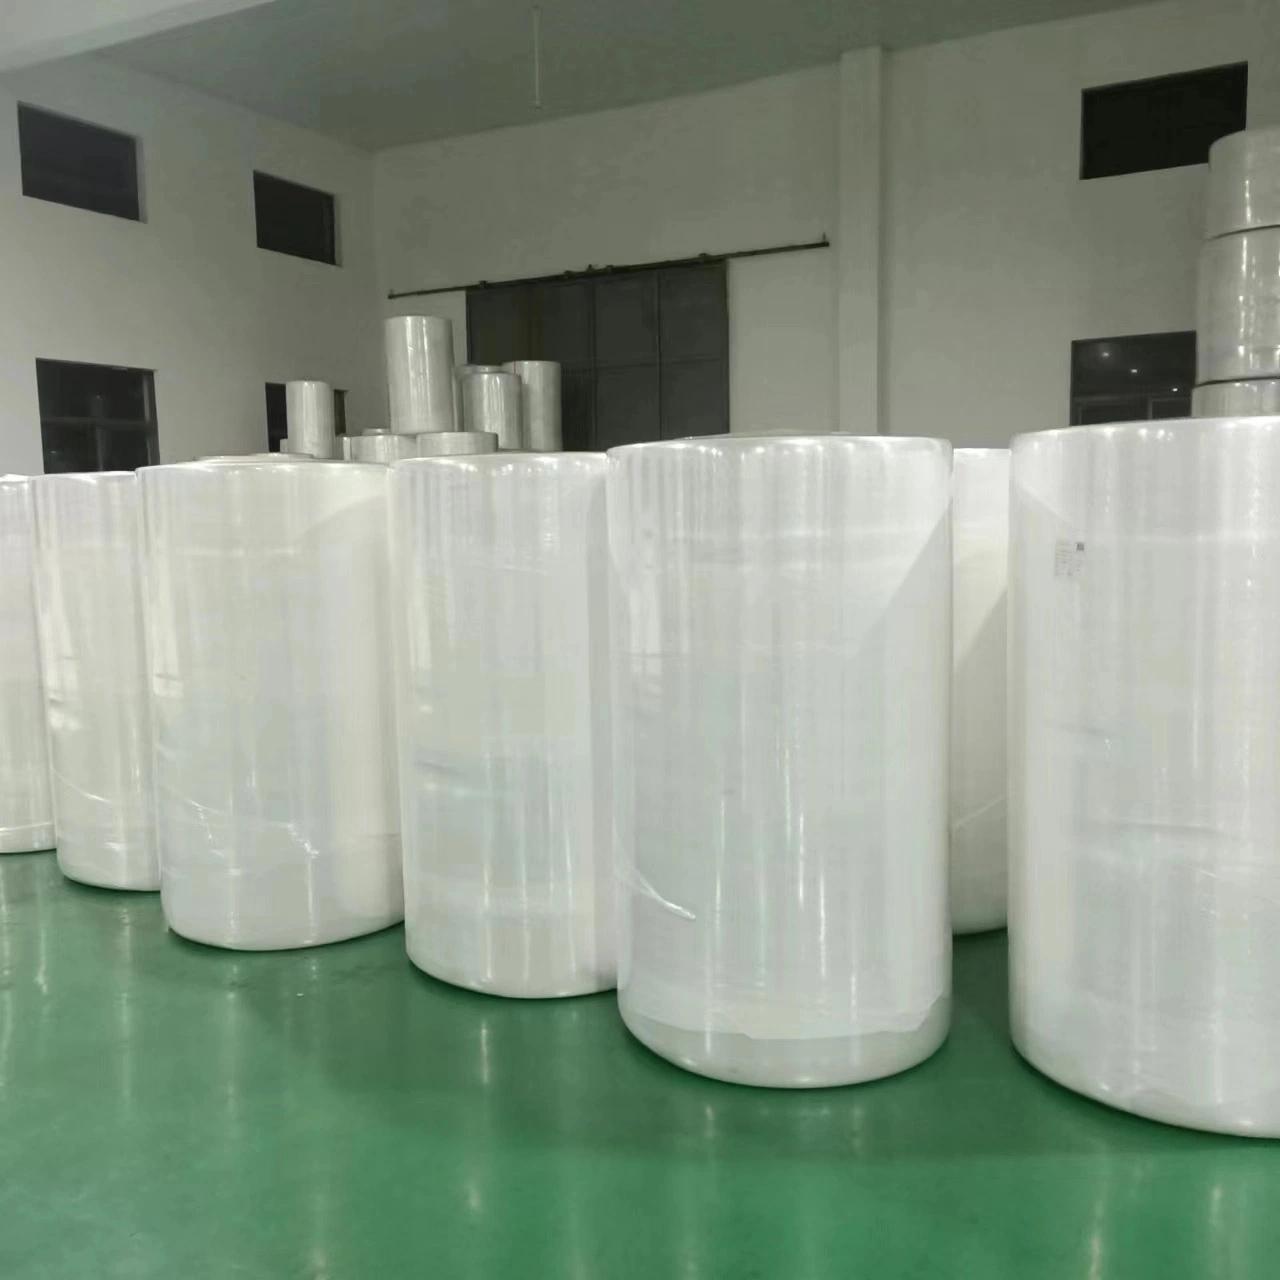 China Textiles Spunlace Nonwoven Fabric Wet Wipes Raw Material